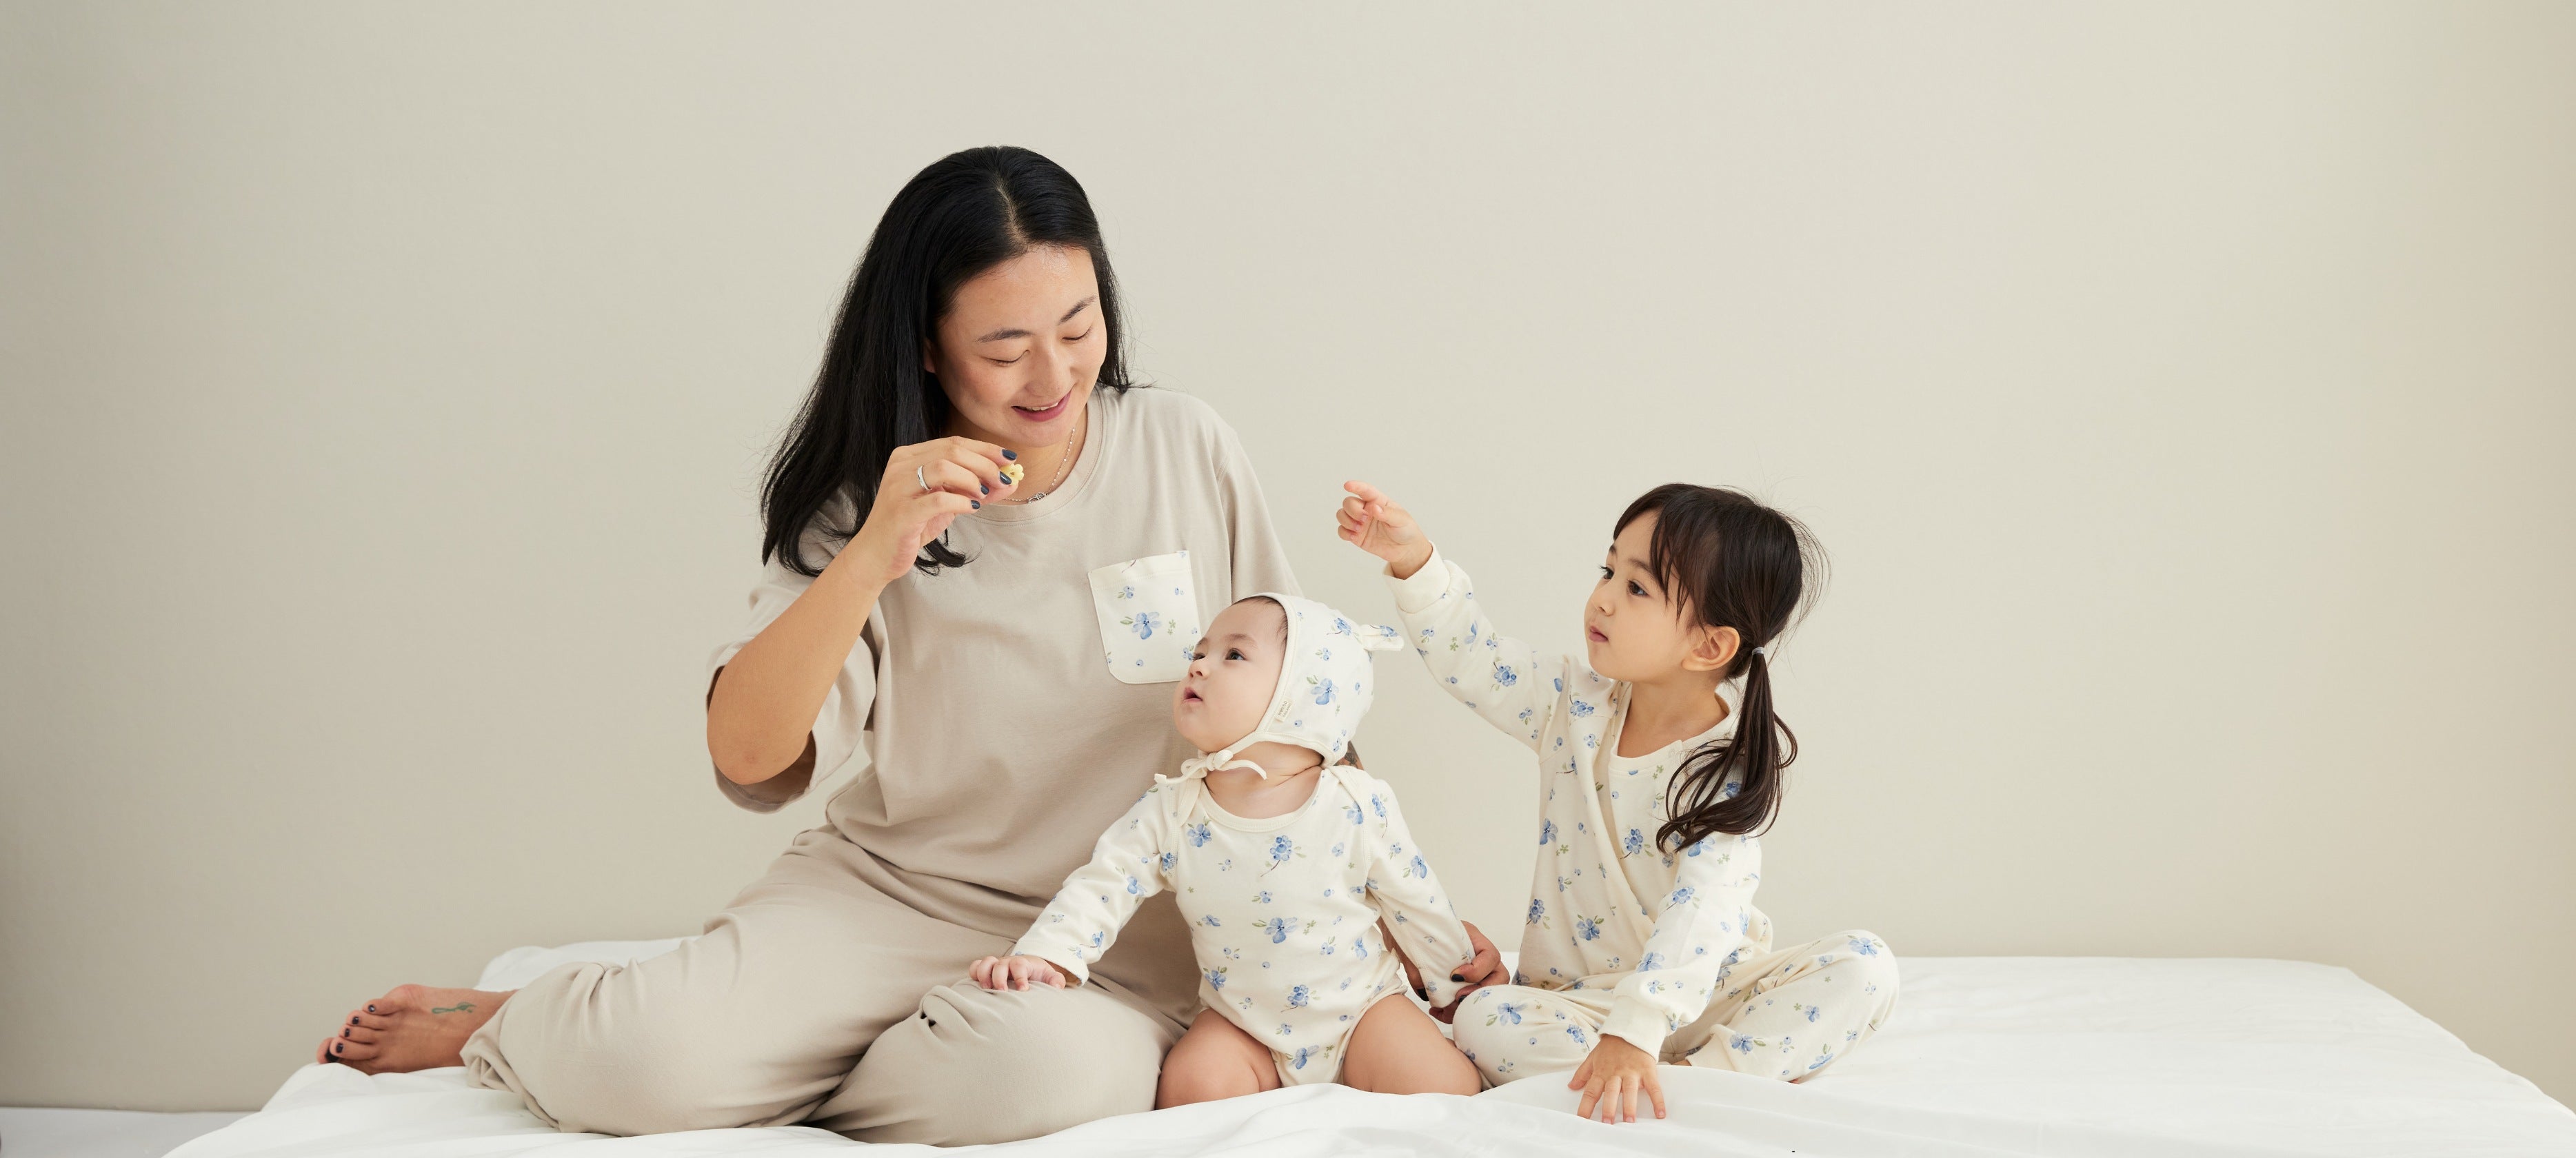 Shop Norsu Organic adult collection, and pair the outfit with your baby girl and baby boy.Feel the softness organic fabric